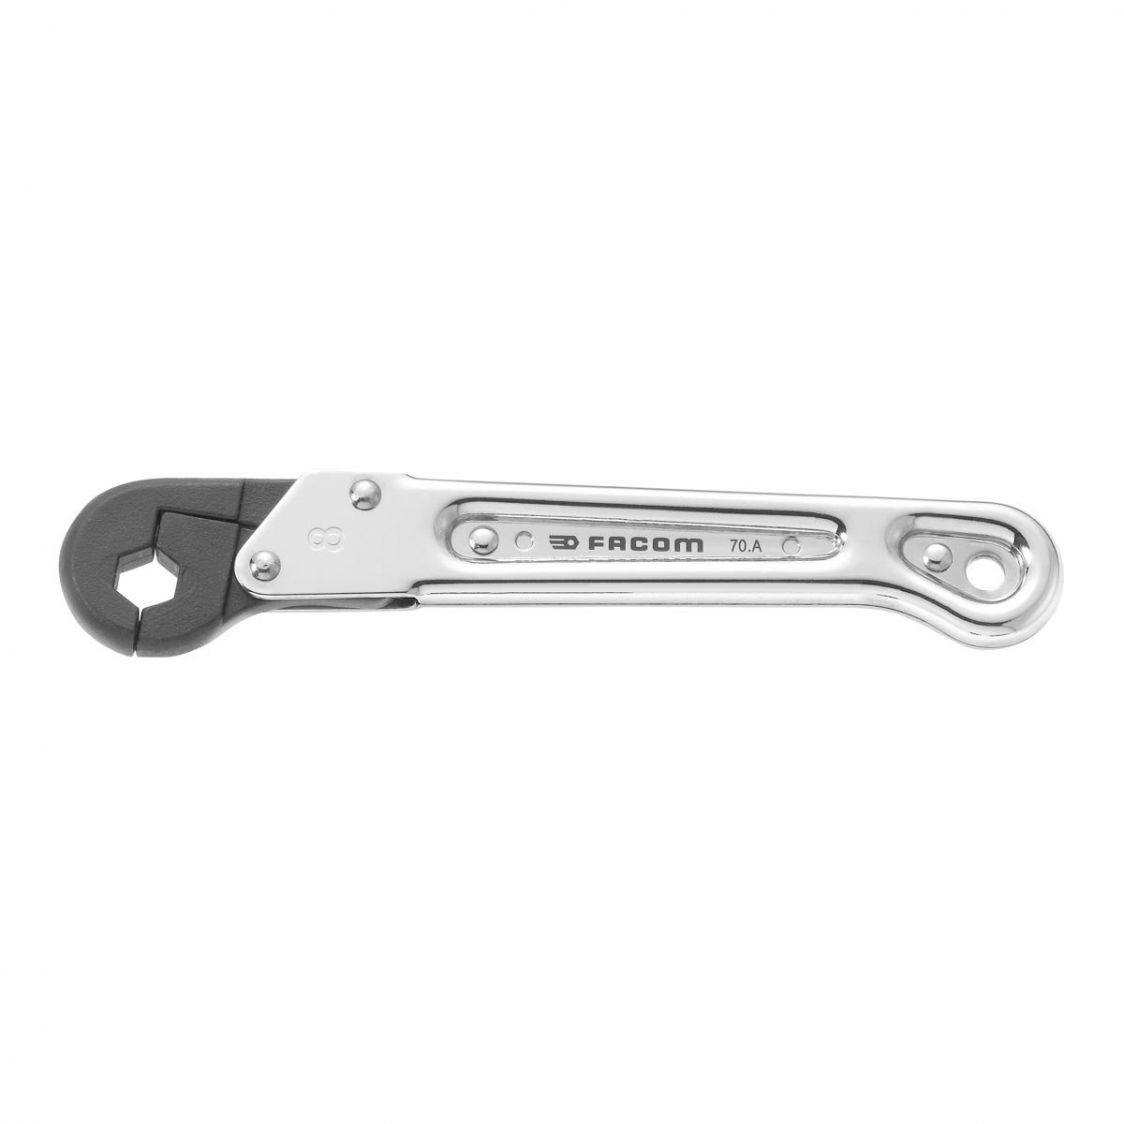 FACOM 70A.16 - 16mm Metric Ratchet Flare Nut Spanner